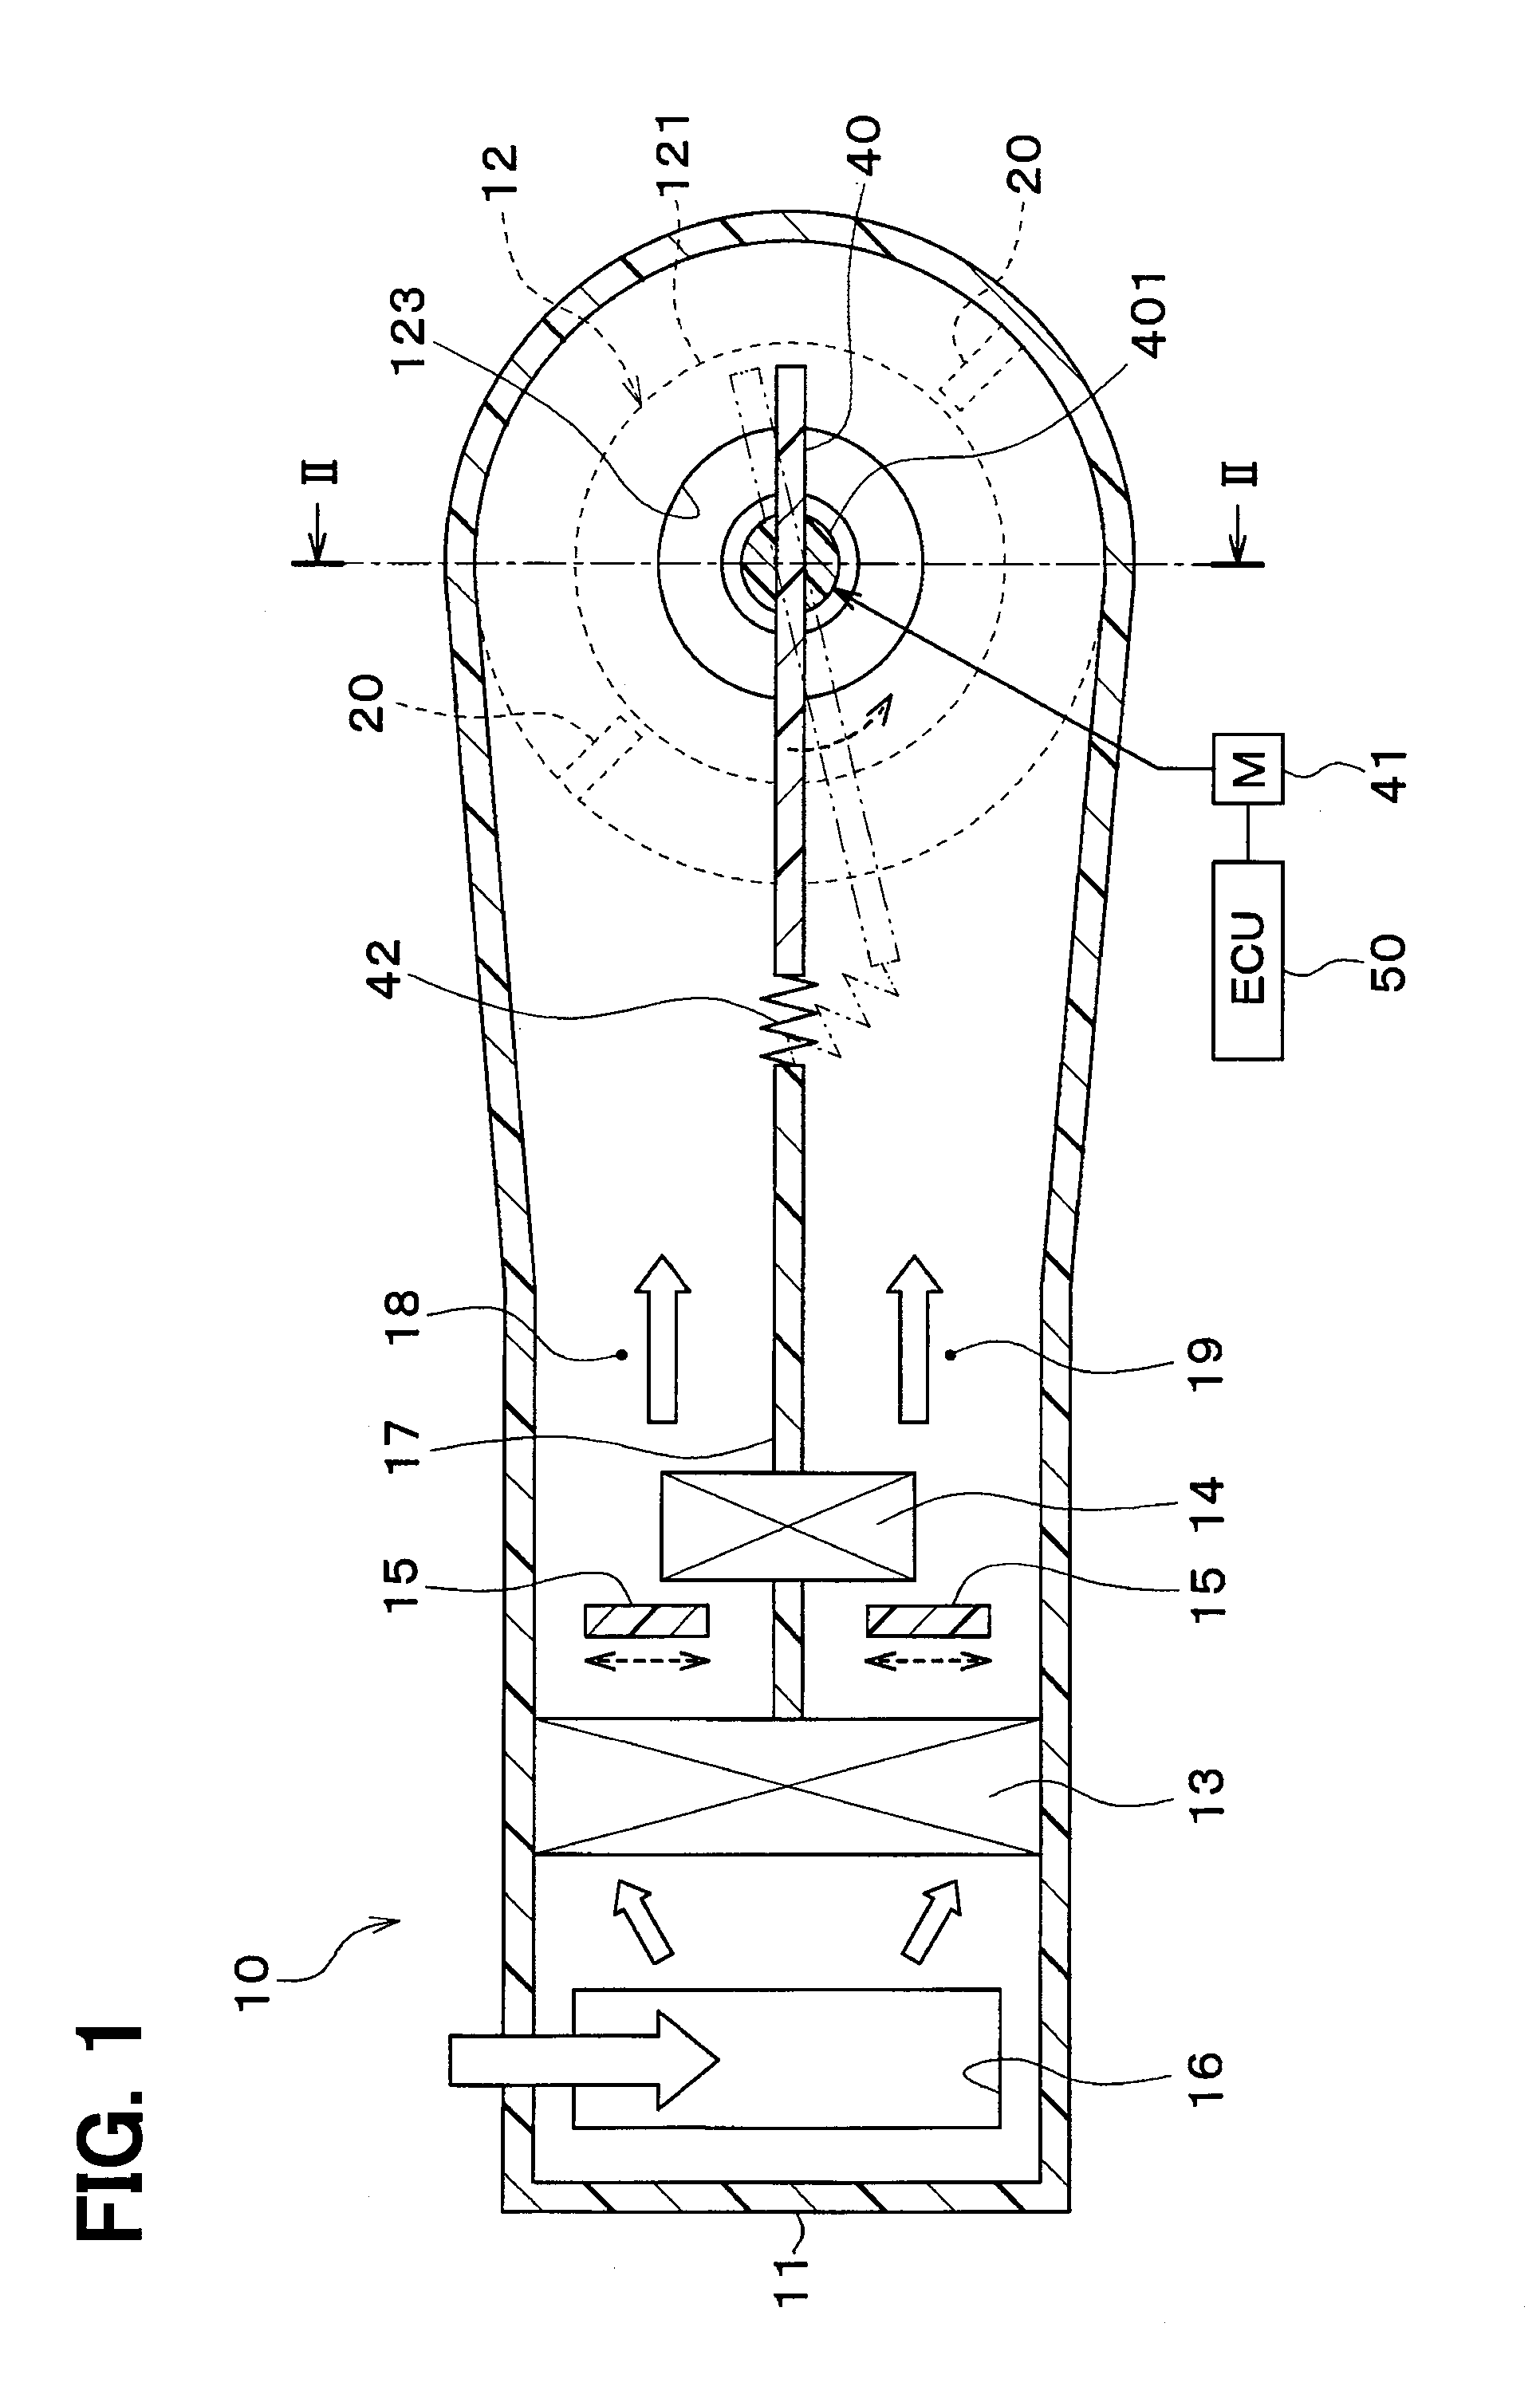 Air conditioning device